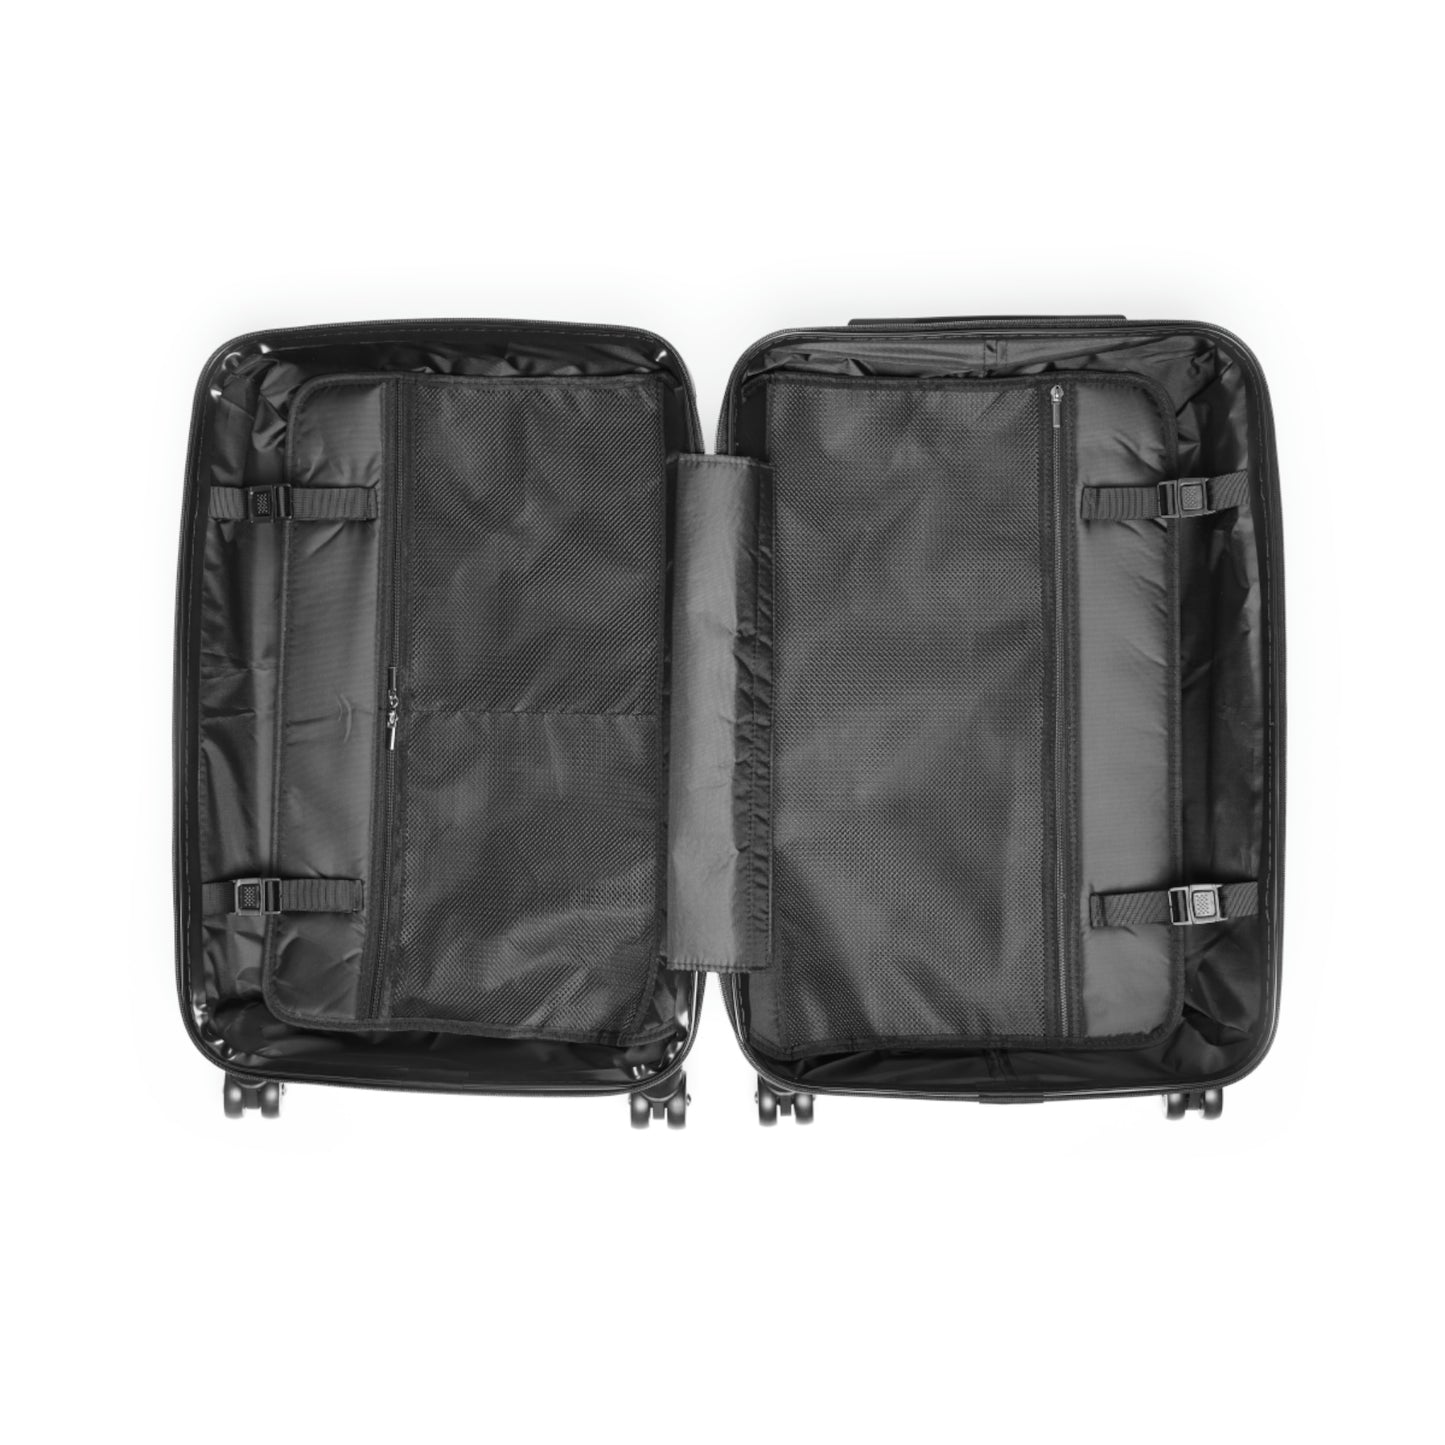 OFF TO THE NEXT RAVE - Suitcases (AVAILABLE IN 3 SIZES)